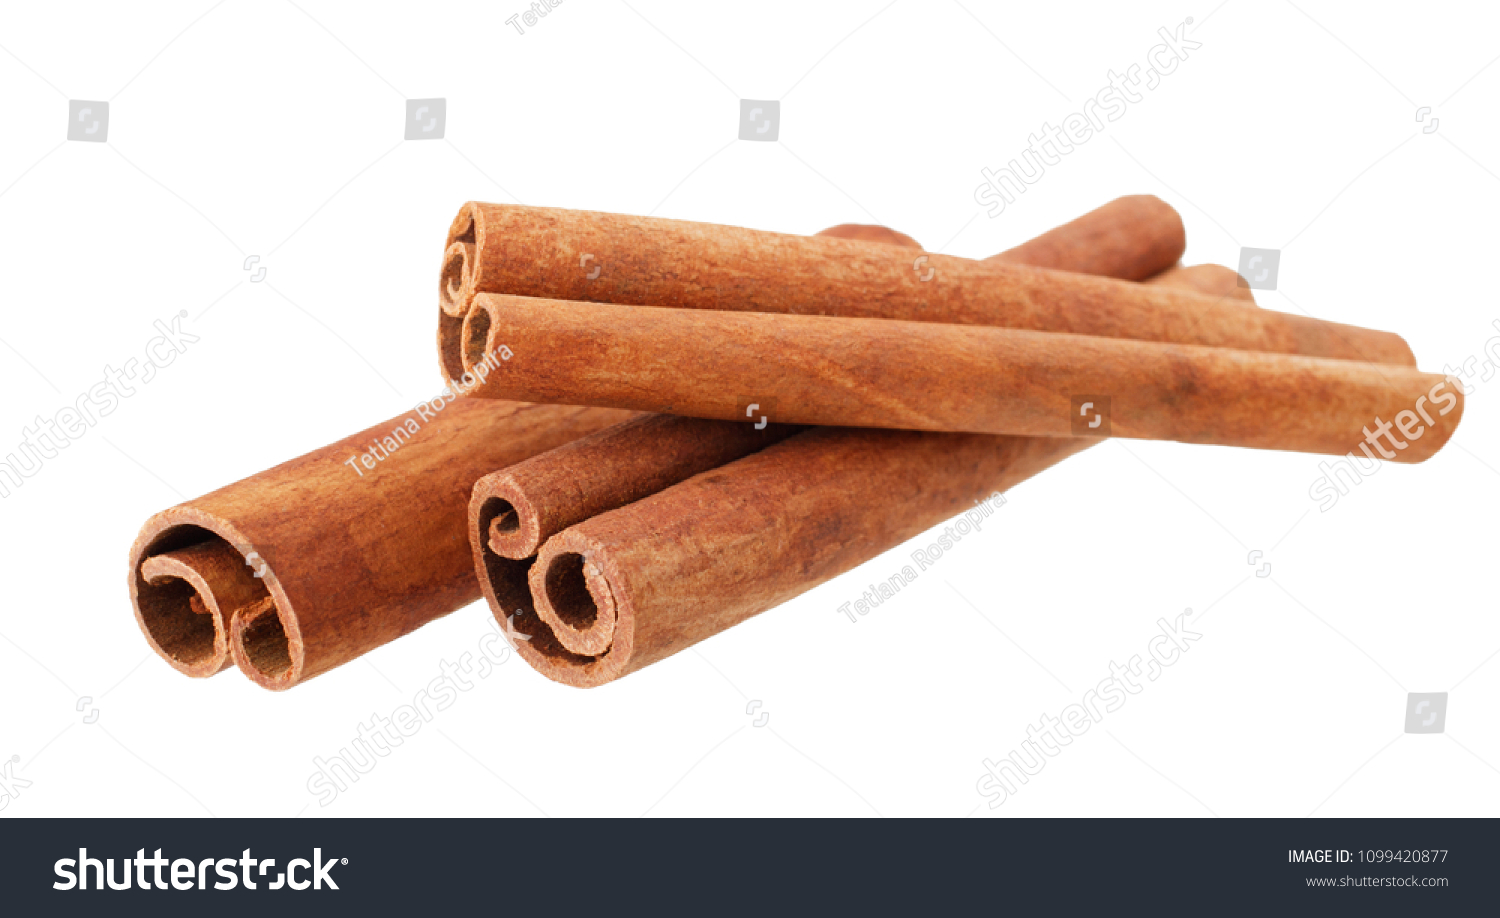 Cinnamon sticks isolated on white background without shadow #1099420877